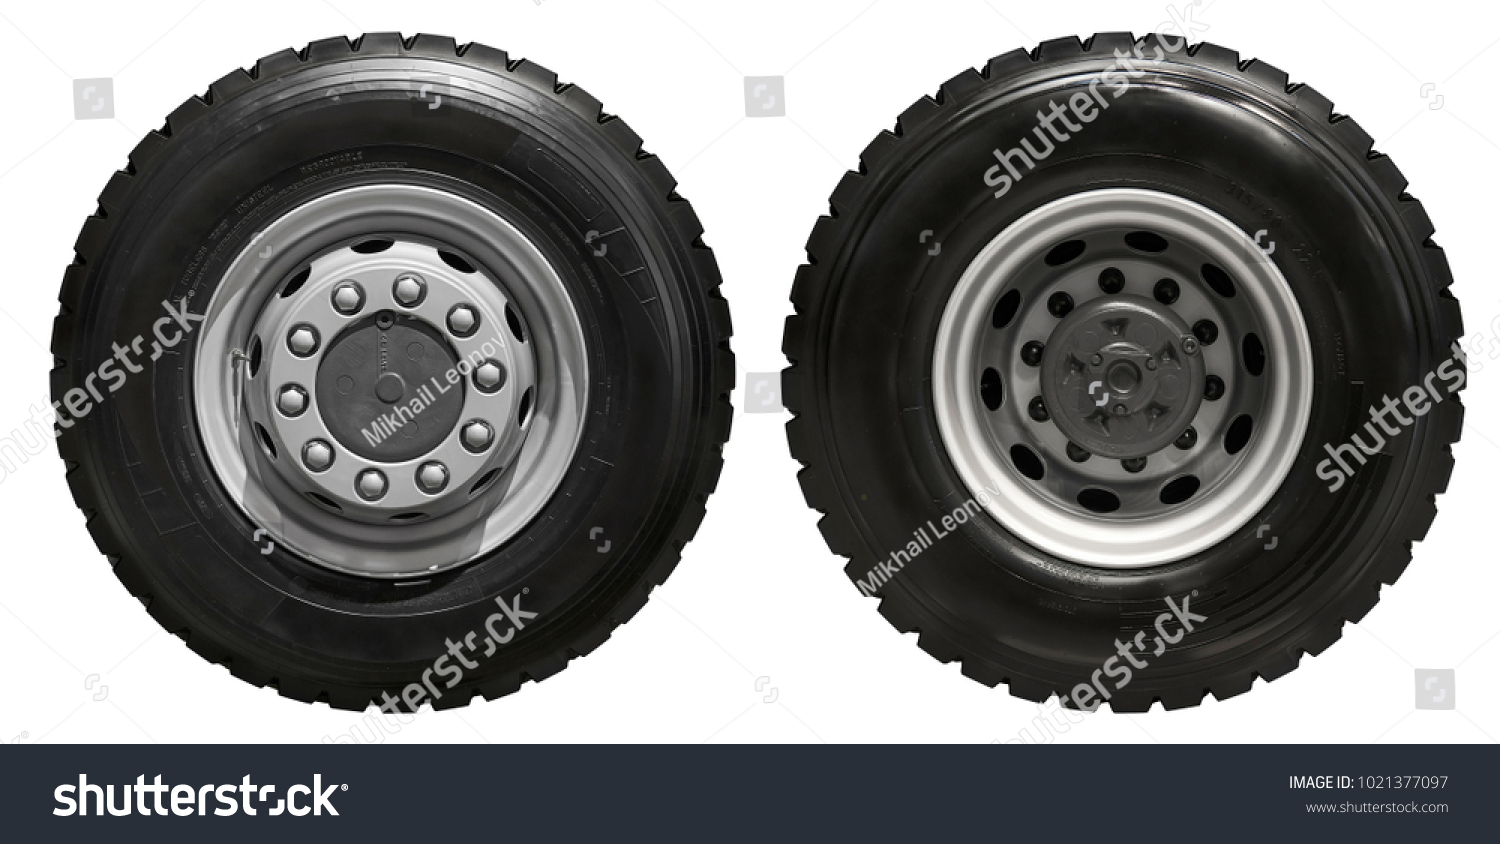 Isolated on white new front rear truck wheels on hub with black shine tires. New clean commercial transport truck mud all terrain wheels for front rear axles. High resolution commercial truck wheels #1021377097